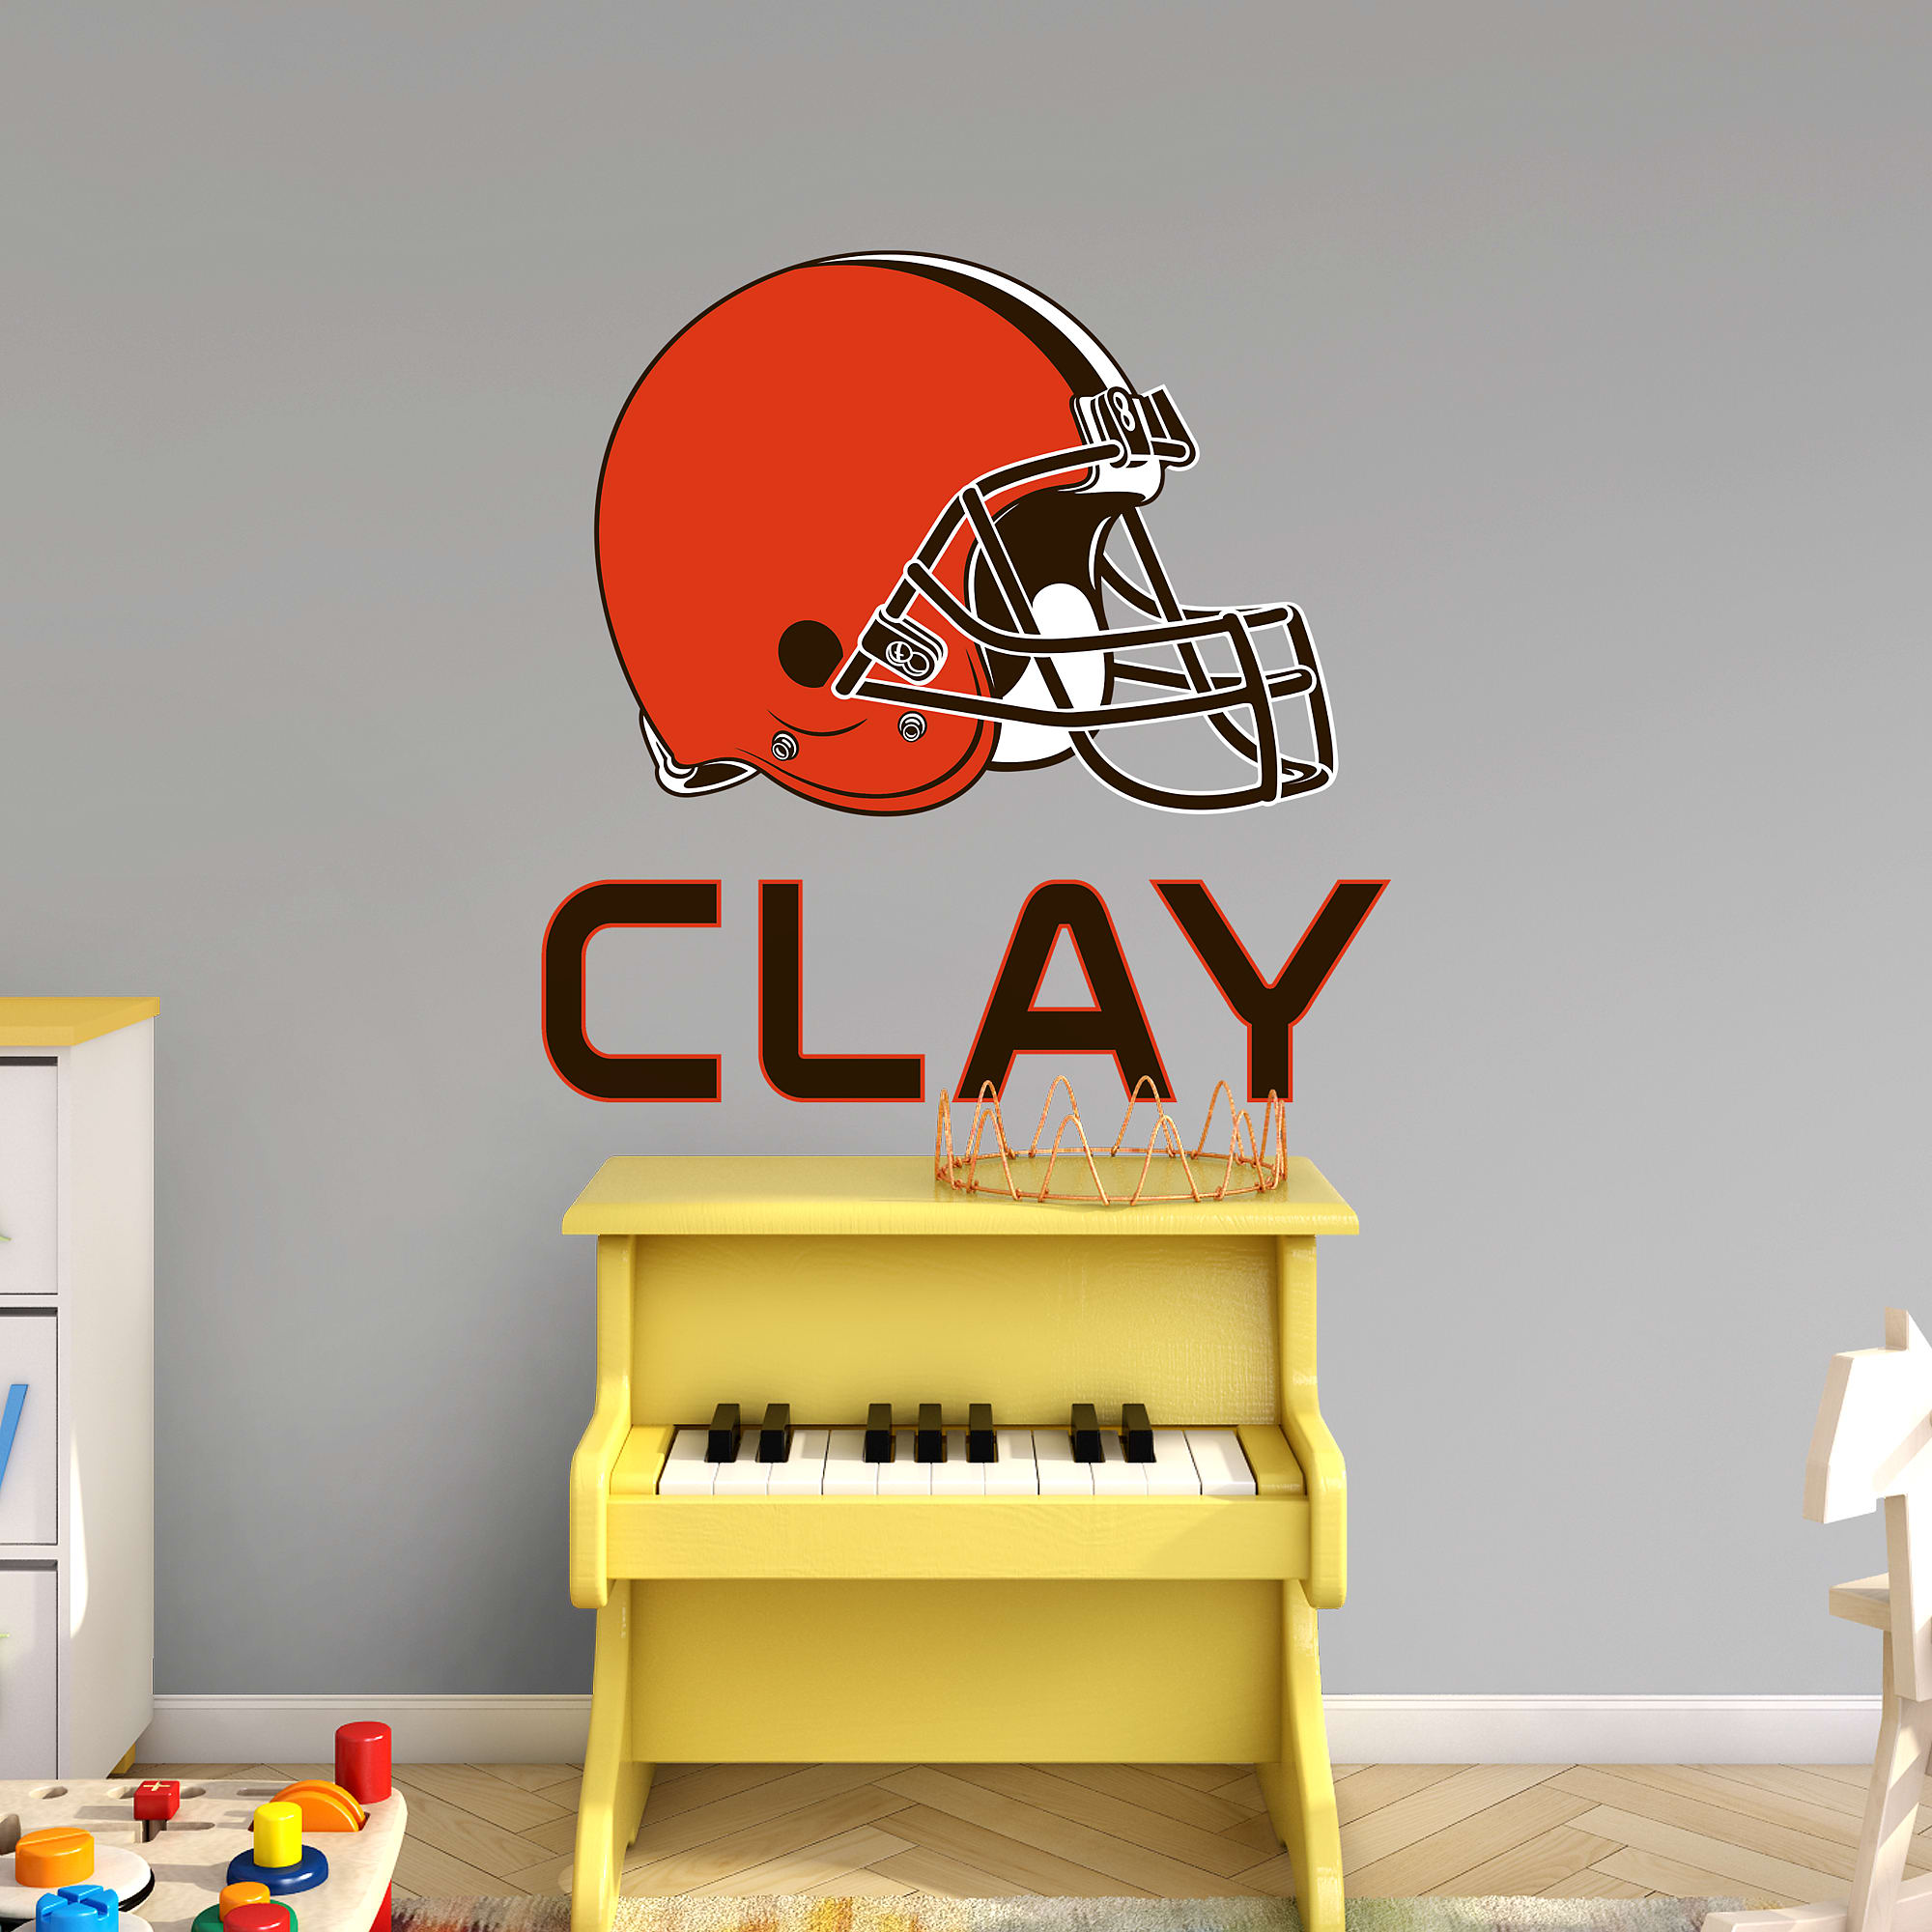 Cleveland Browns: Stacked Personalized Name - Officially Licensed NFL Transfer Decal in Black (52"W x 39.5"H) by Fathead | Vinyl